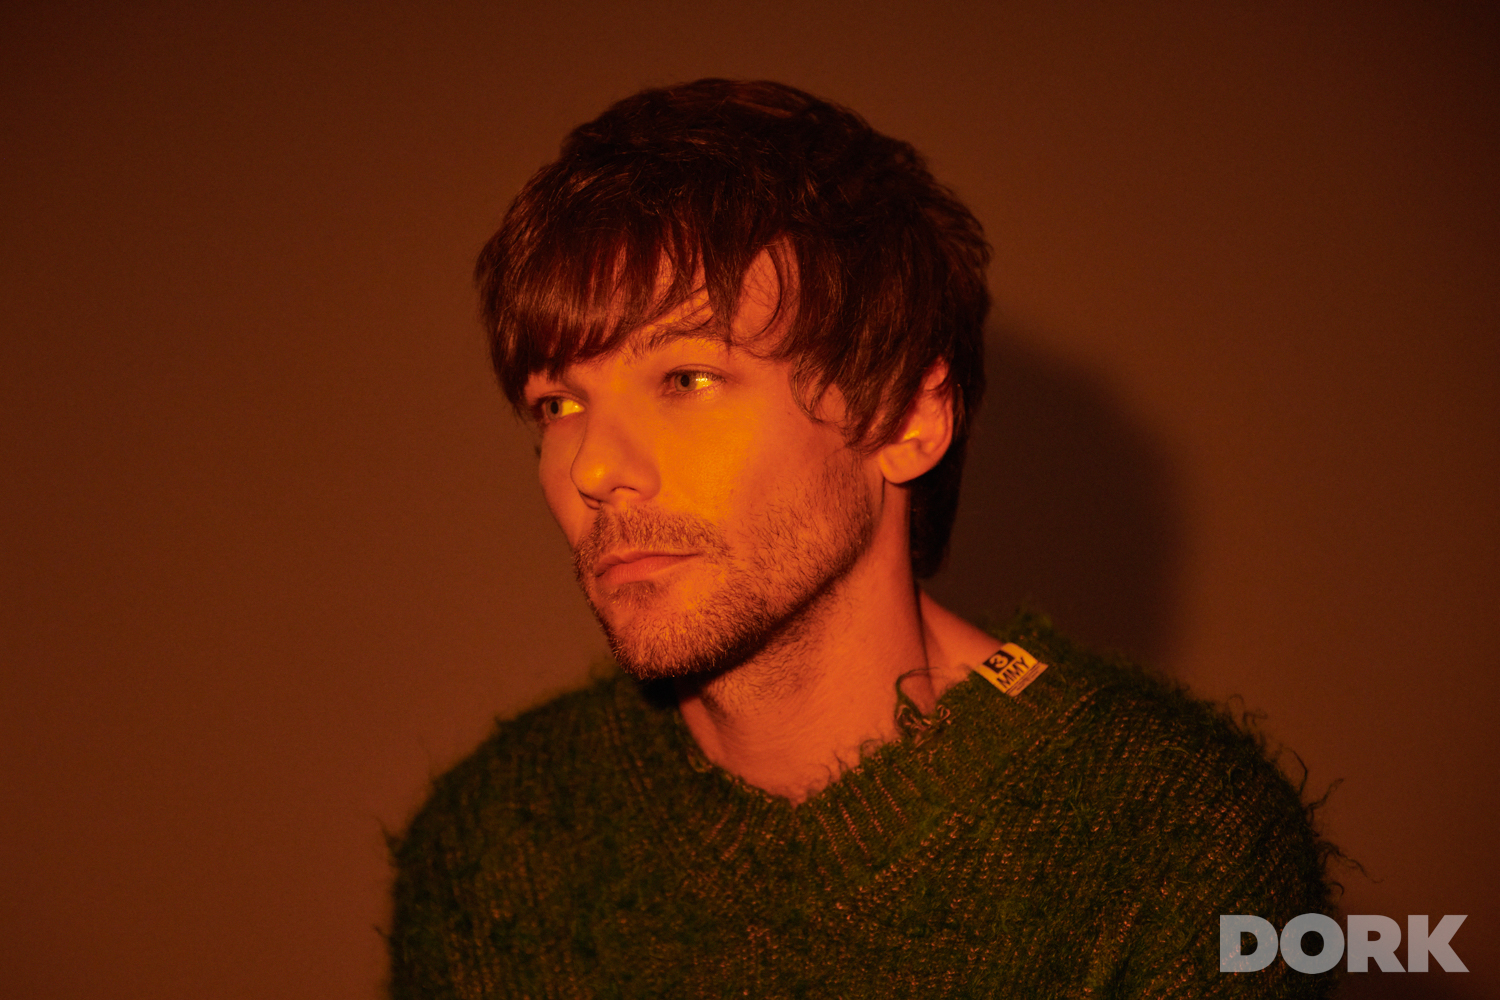 Dork on X: Louis Tomlinson (@Louis_Tomlinson) is the first cover star for  the October 2022 issue of Dork. With an in-depth interview and photoshoot,  if you want shots like this in glorious